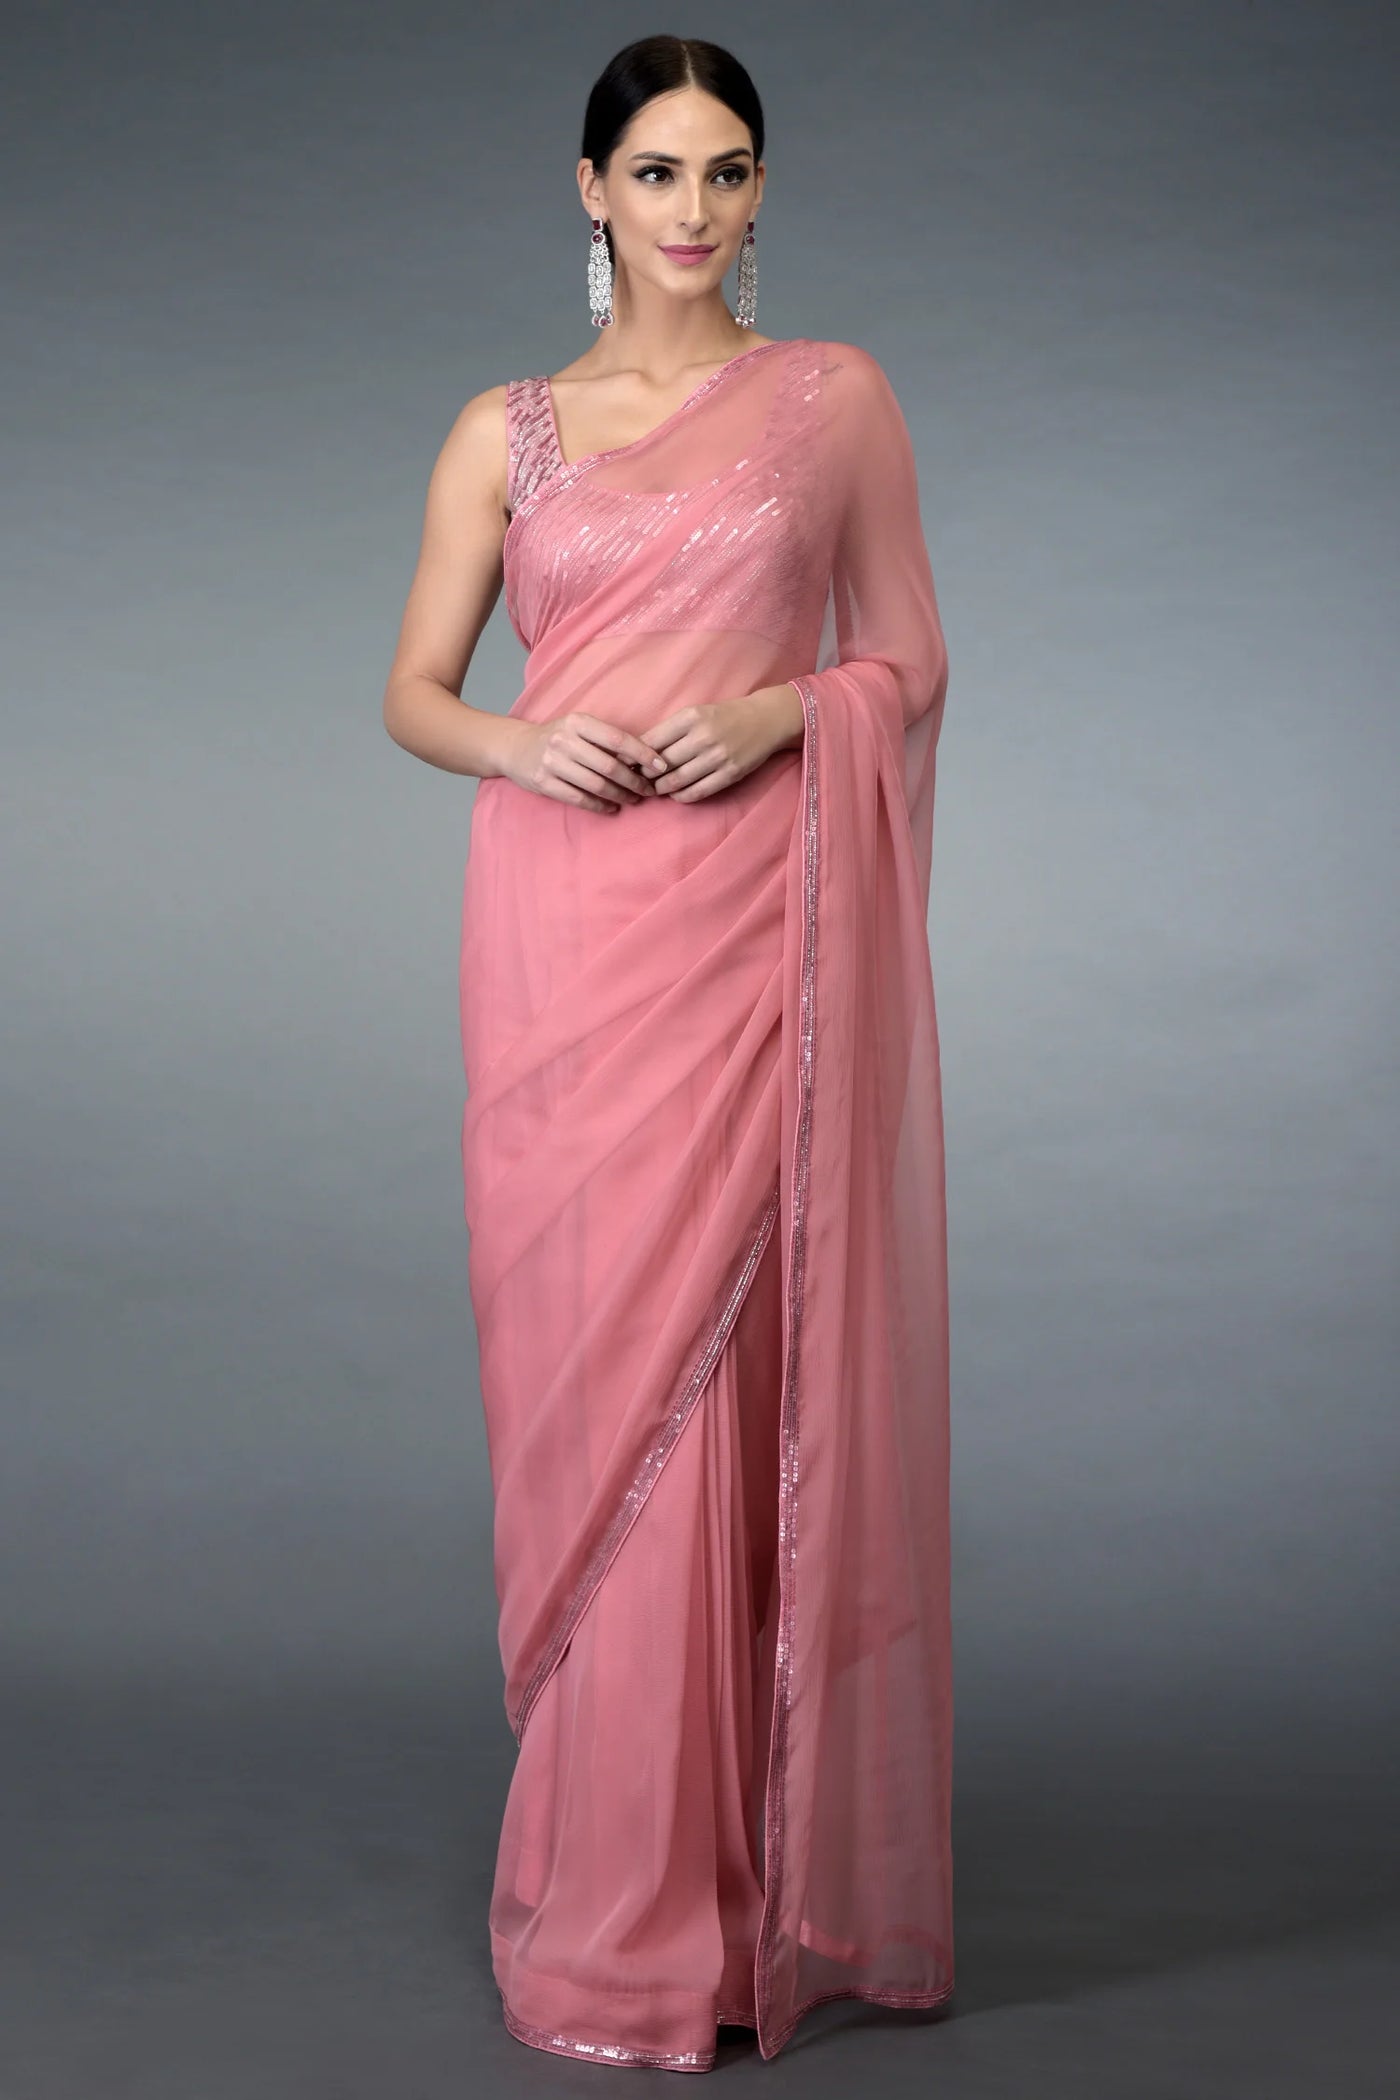 Pink Pure Chiffon Saree Set Indian Clothing in Denver, CO, Aurora, CO, Boulder, CO, Fort Collins, CO, Colorado Springs, CO, Parker, CO, Highlands Ranch, CO, Cherry Creek, CO, Centennial, CO, and Longmont, CO. NATIONWIDE SHIPPING USA- India Fashion X